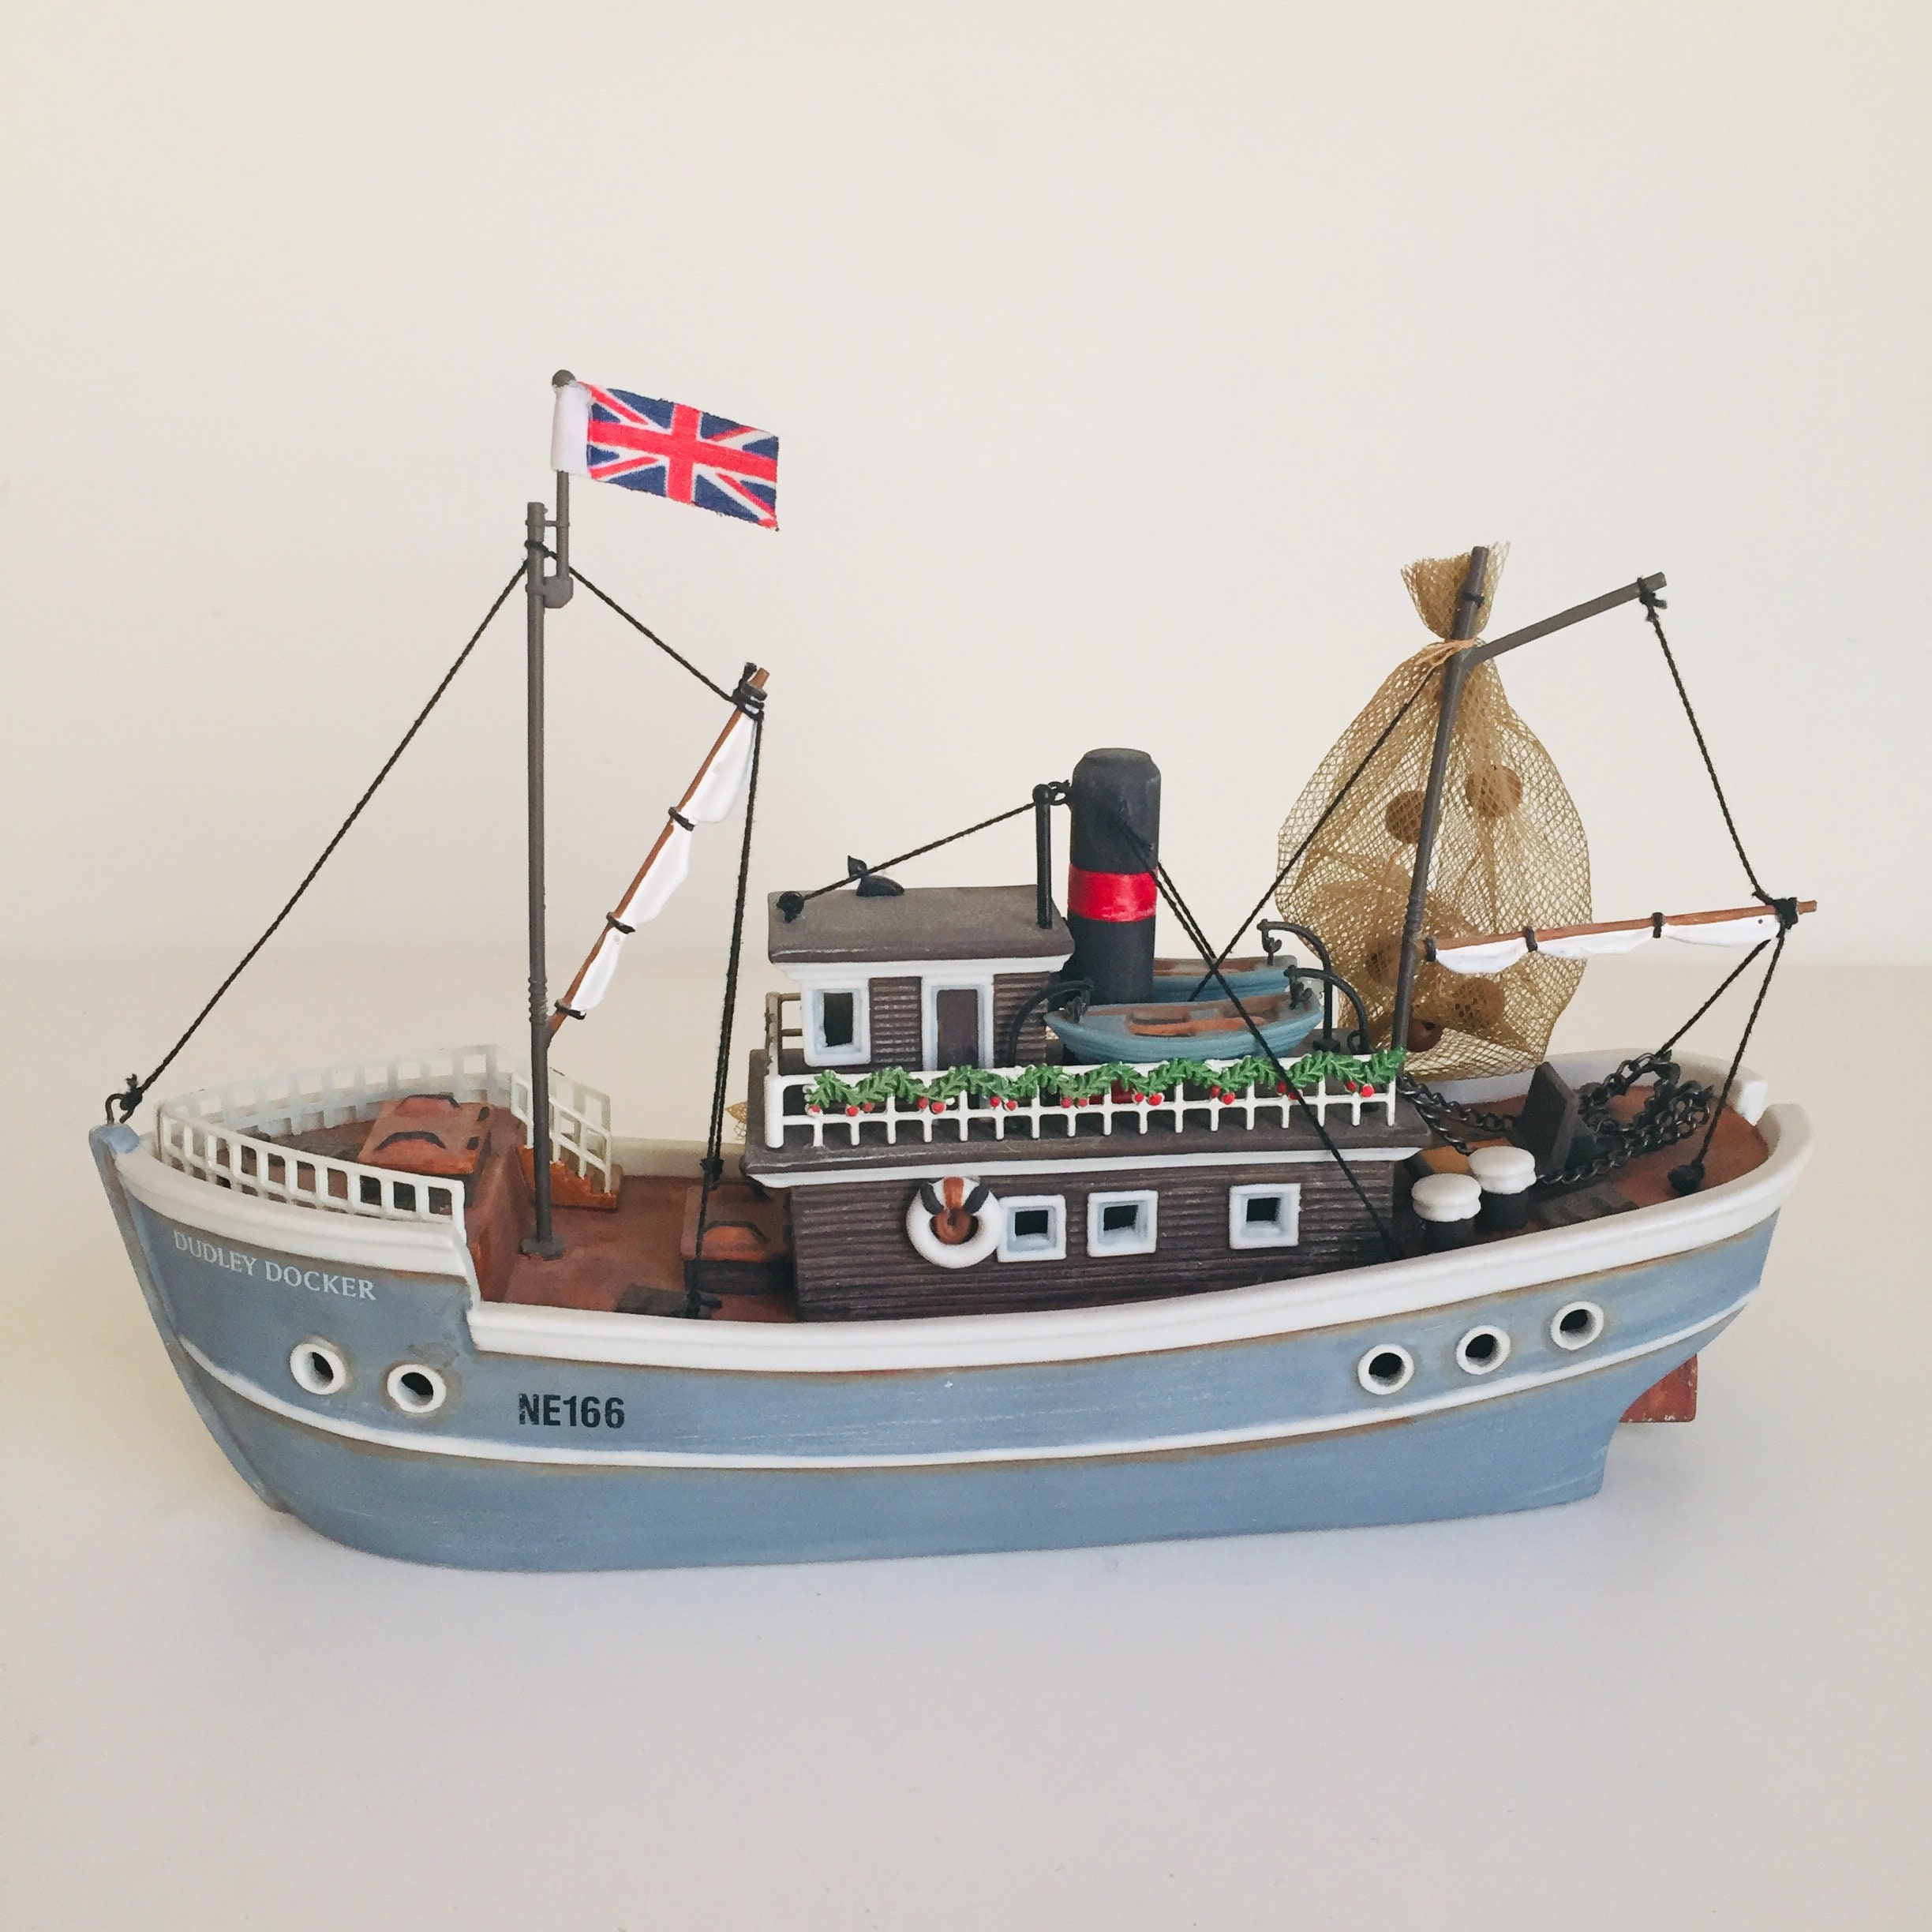 to buy and 100% price guarantee Department 56 Dudley Docker